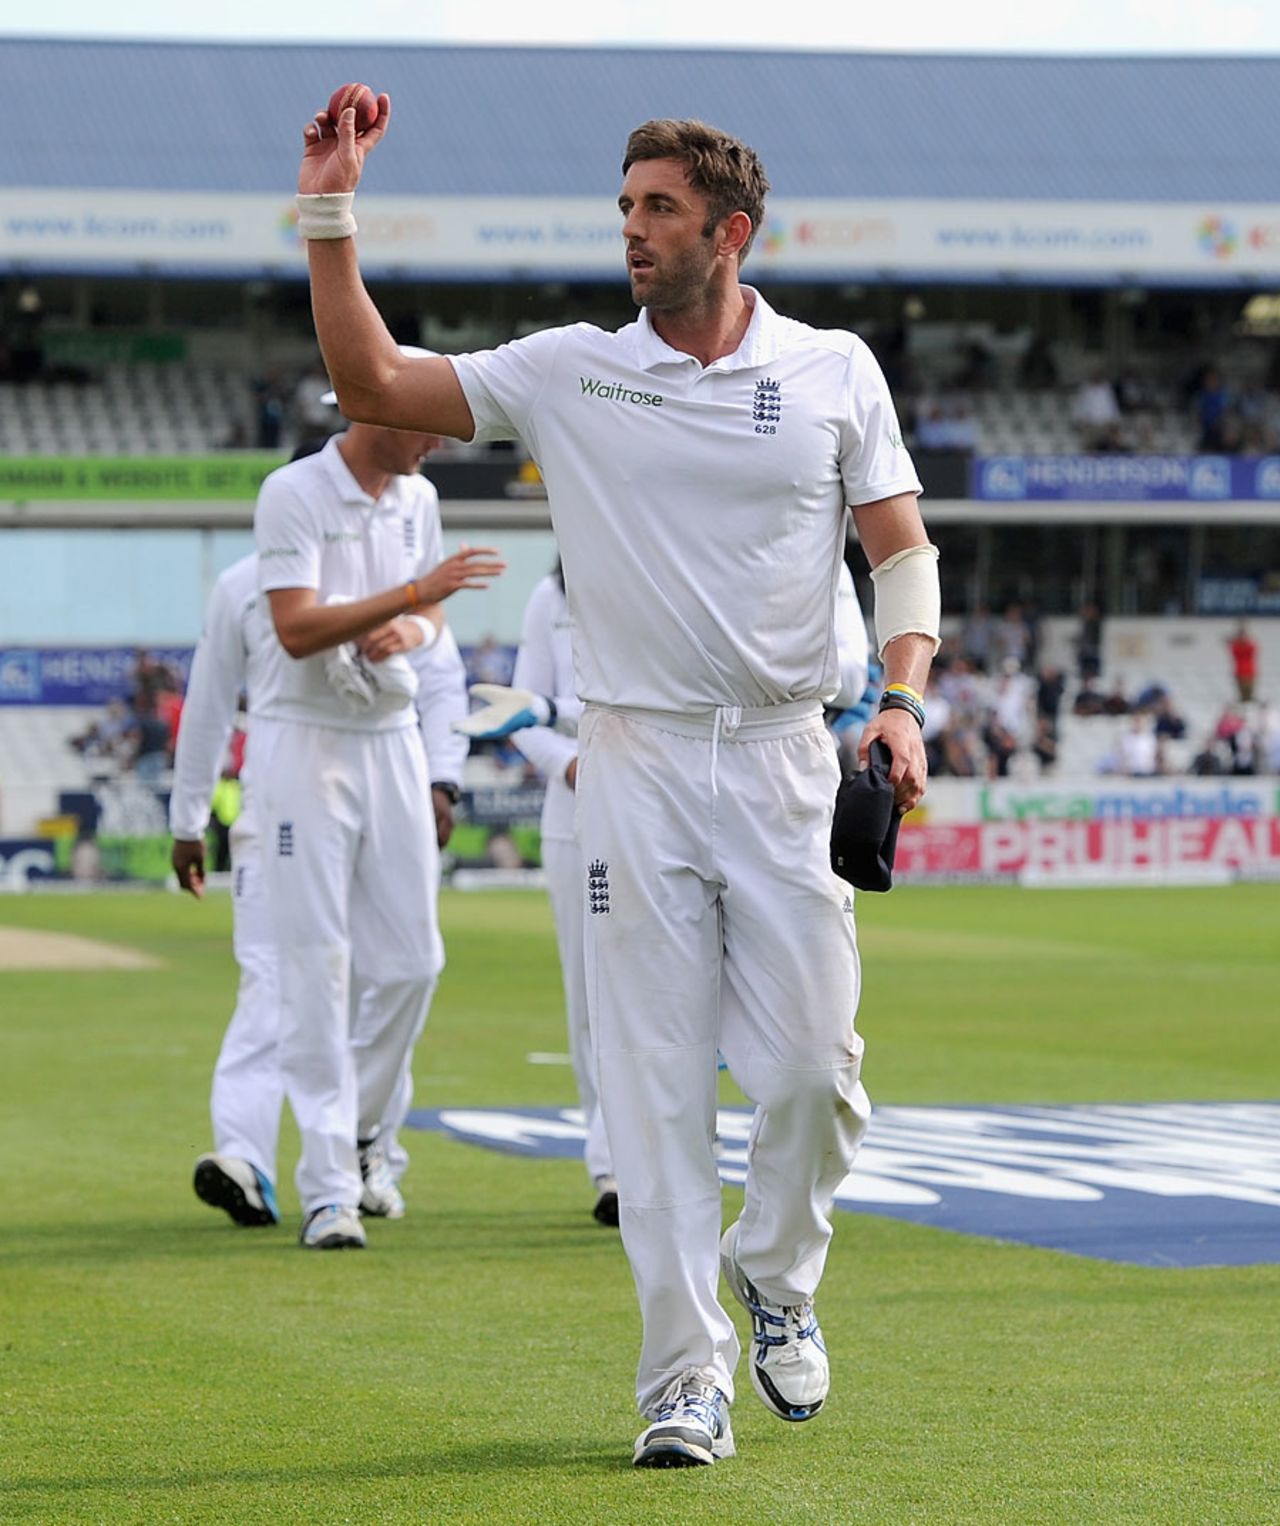 Liam Plunkett takes the applause for his maiden five-wicket haul, England v Sri Lanka, 2nd Investec Test, Headingley, 1st day, June 20, 2014